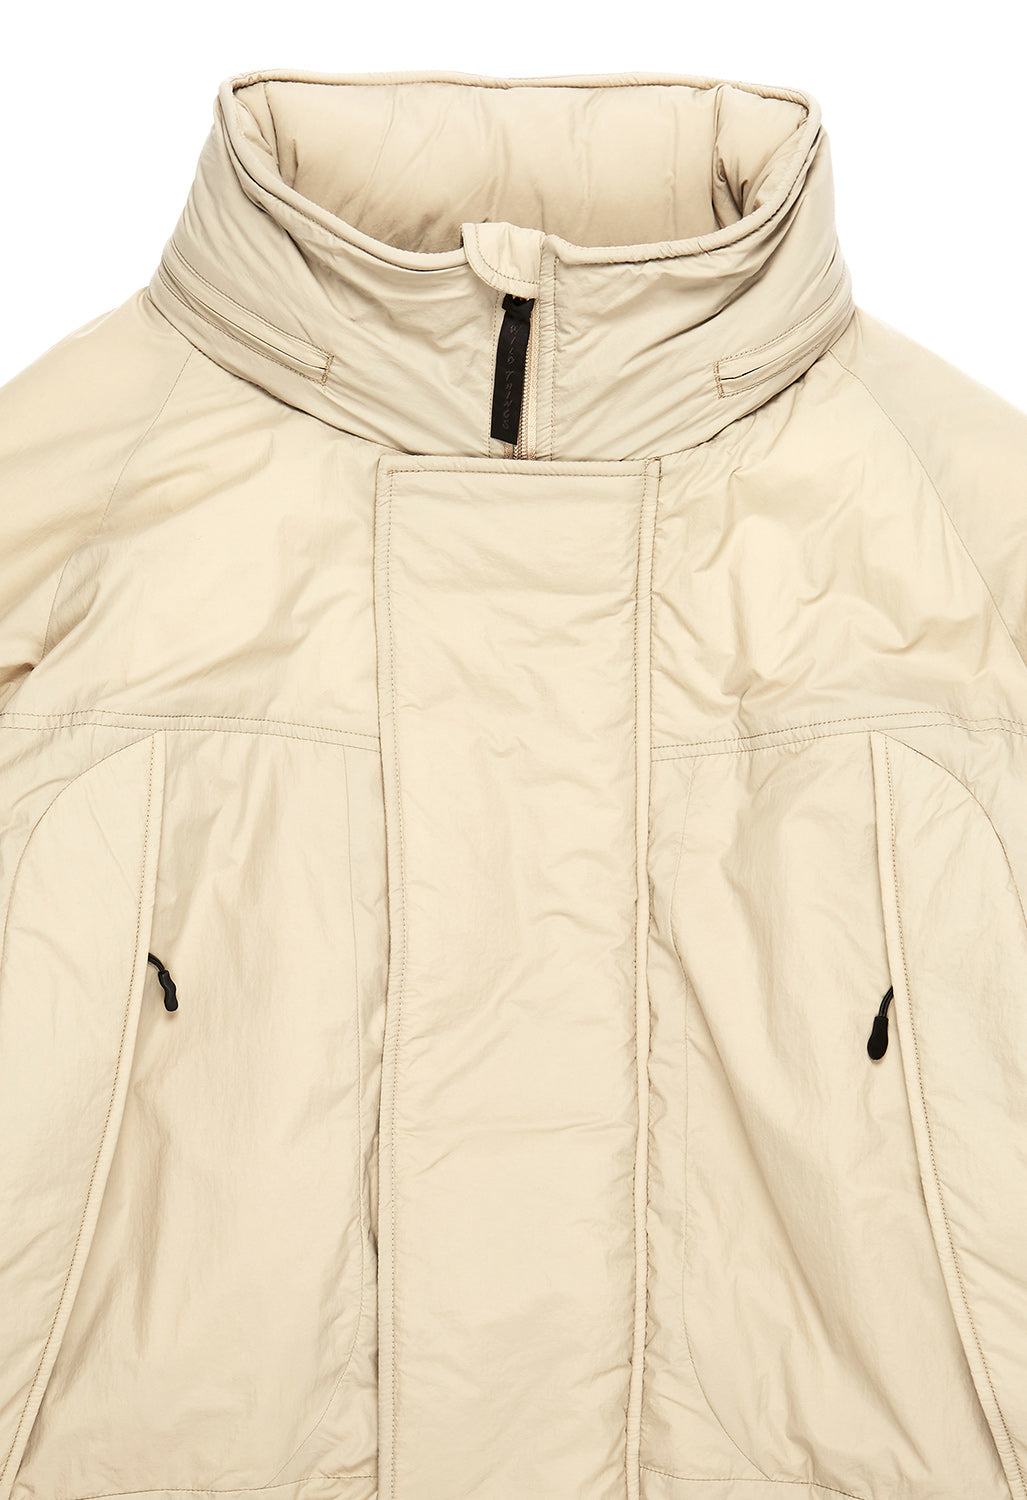 Wild Things Men's Monster Parka - Taupe